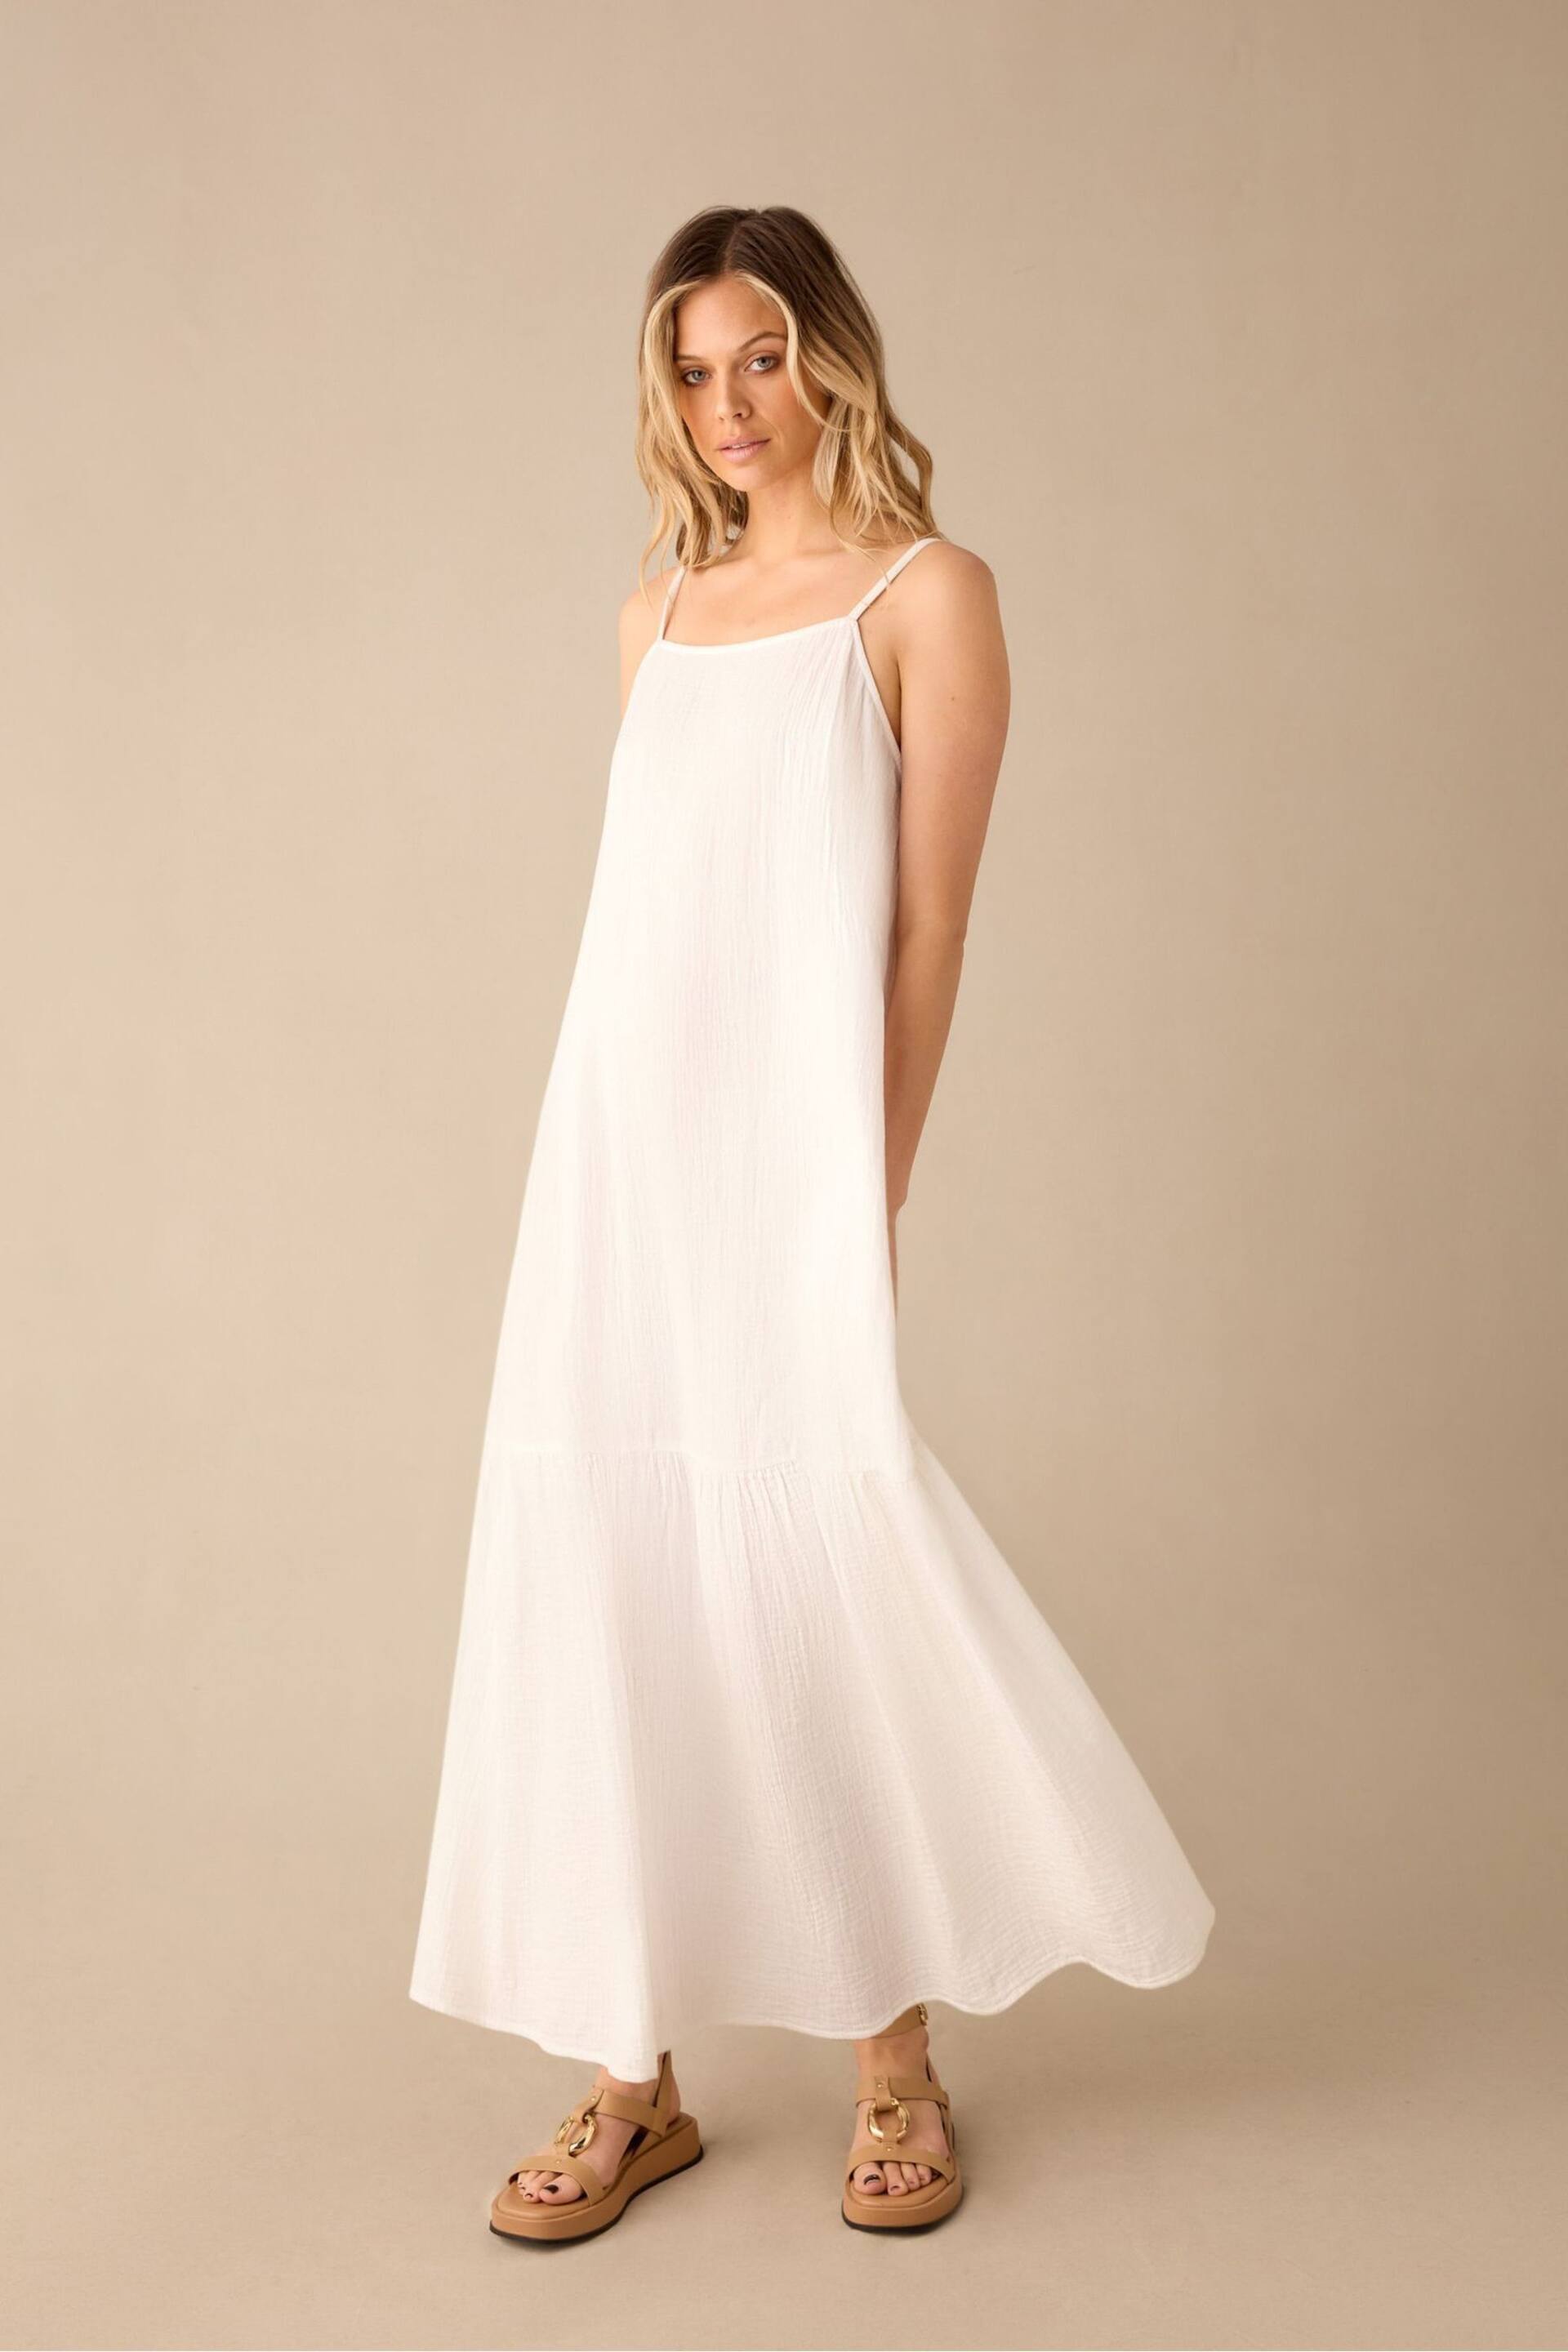 Ro&Zo White Tiered Hem Strappy Cheesecloth Dress - Image 3 of 5